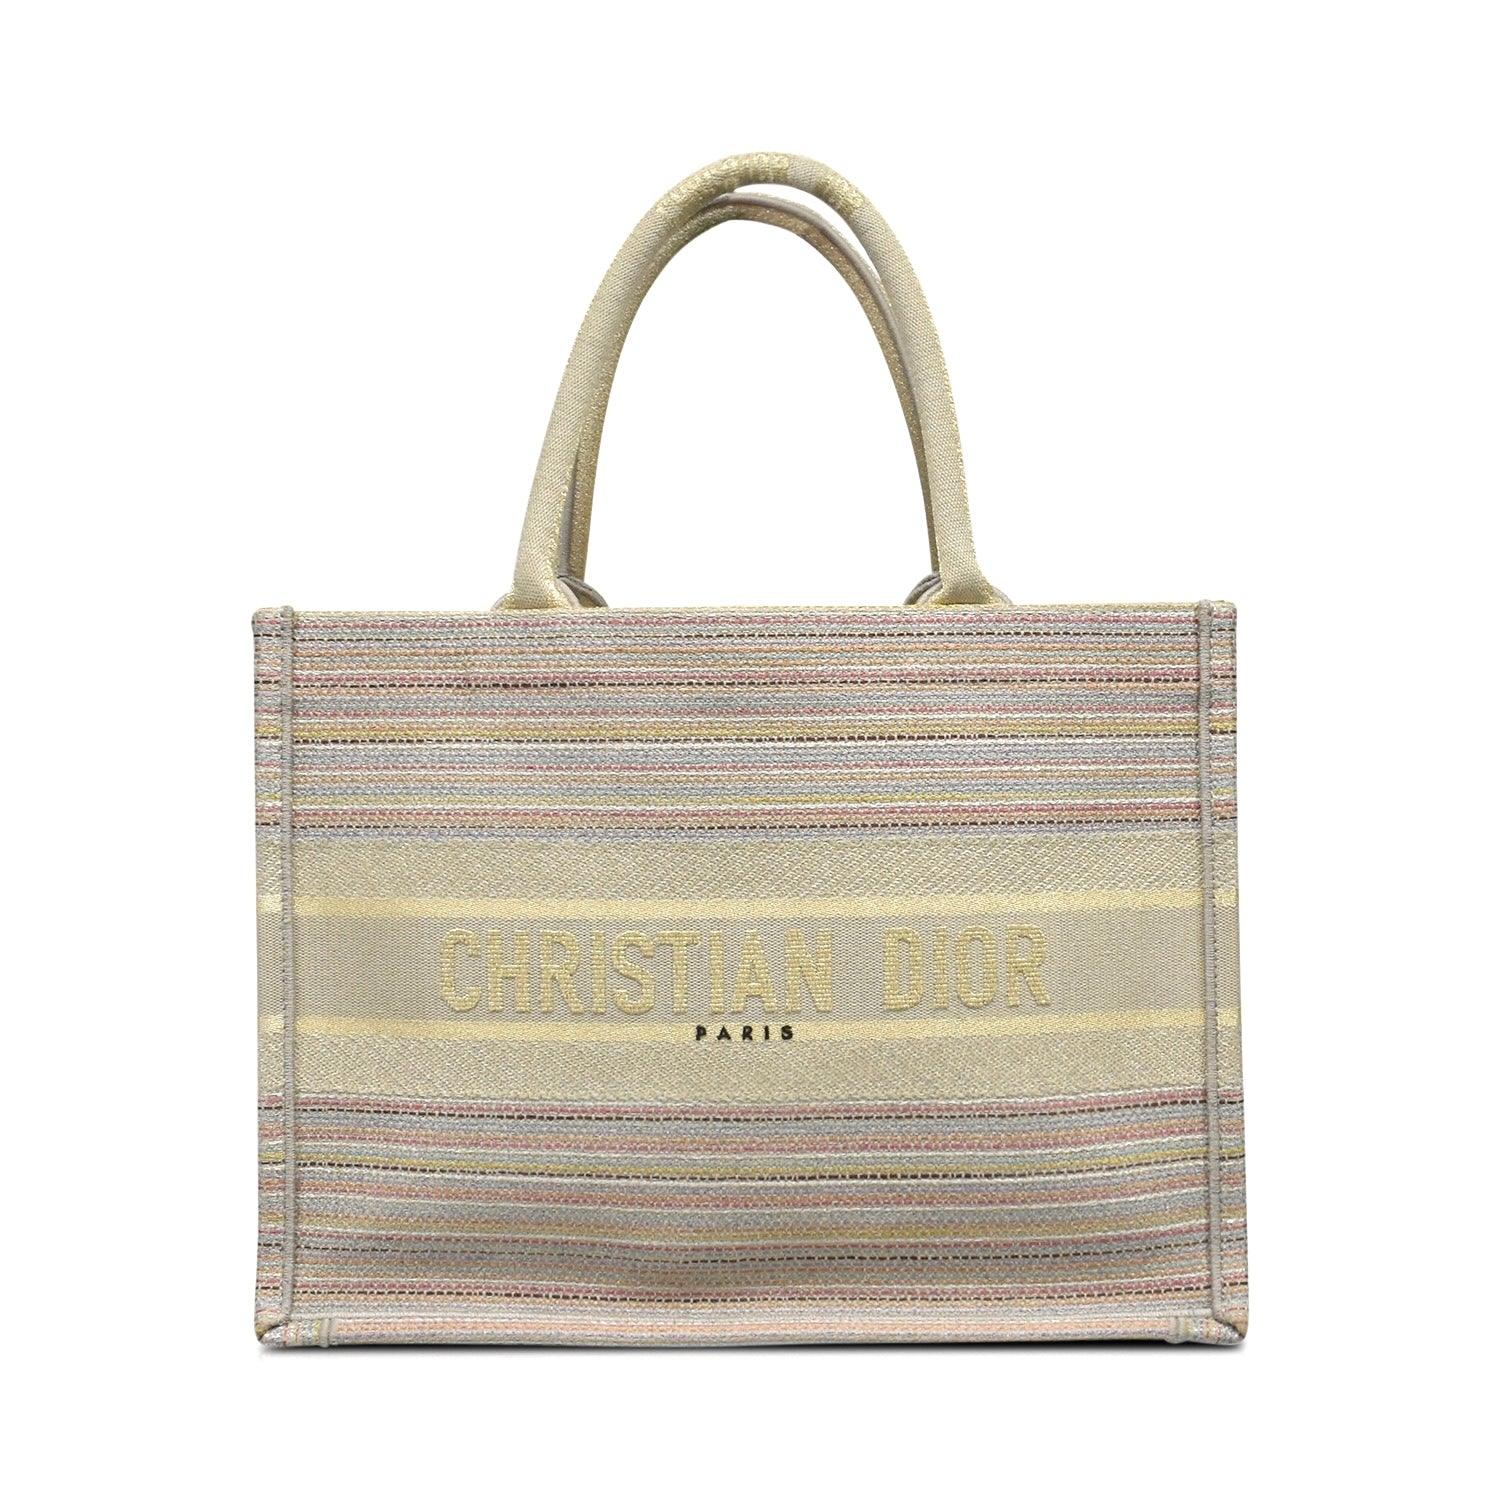 Christian Dior 'Book Tote' - Fashionably Yours